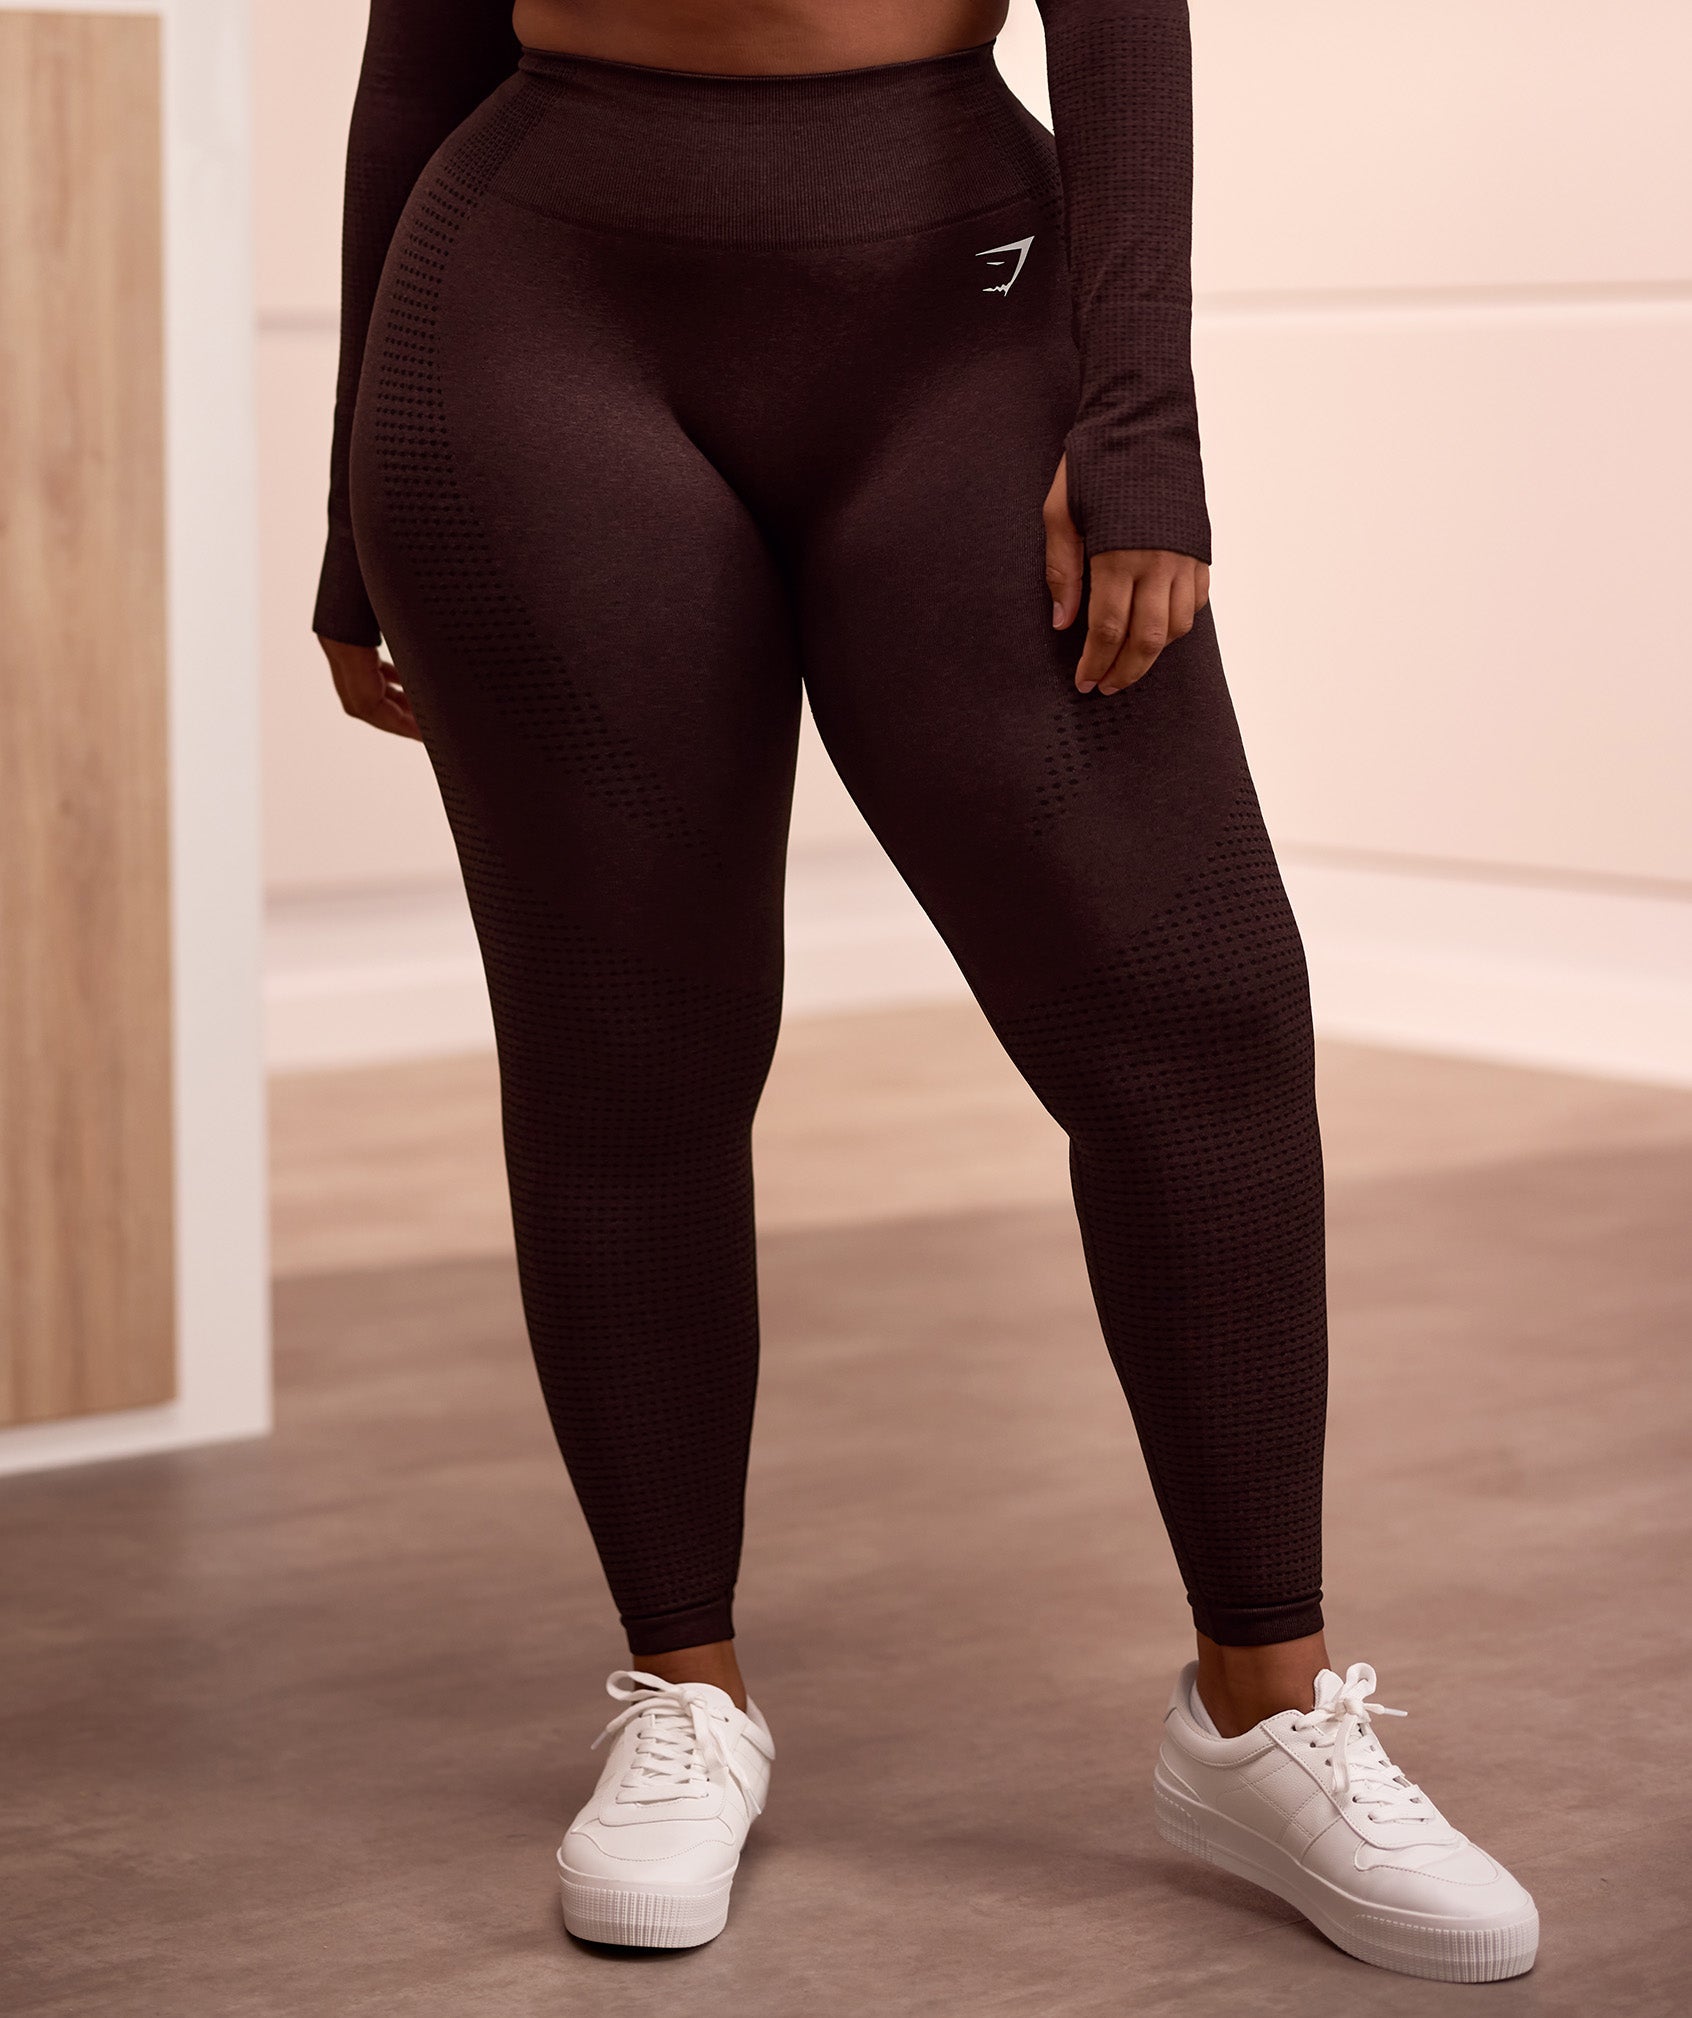 Gymshark Apex Seamless Leggings Brown Size M - $45 (29% Off Retail) - From  Stephanie